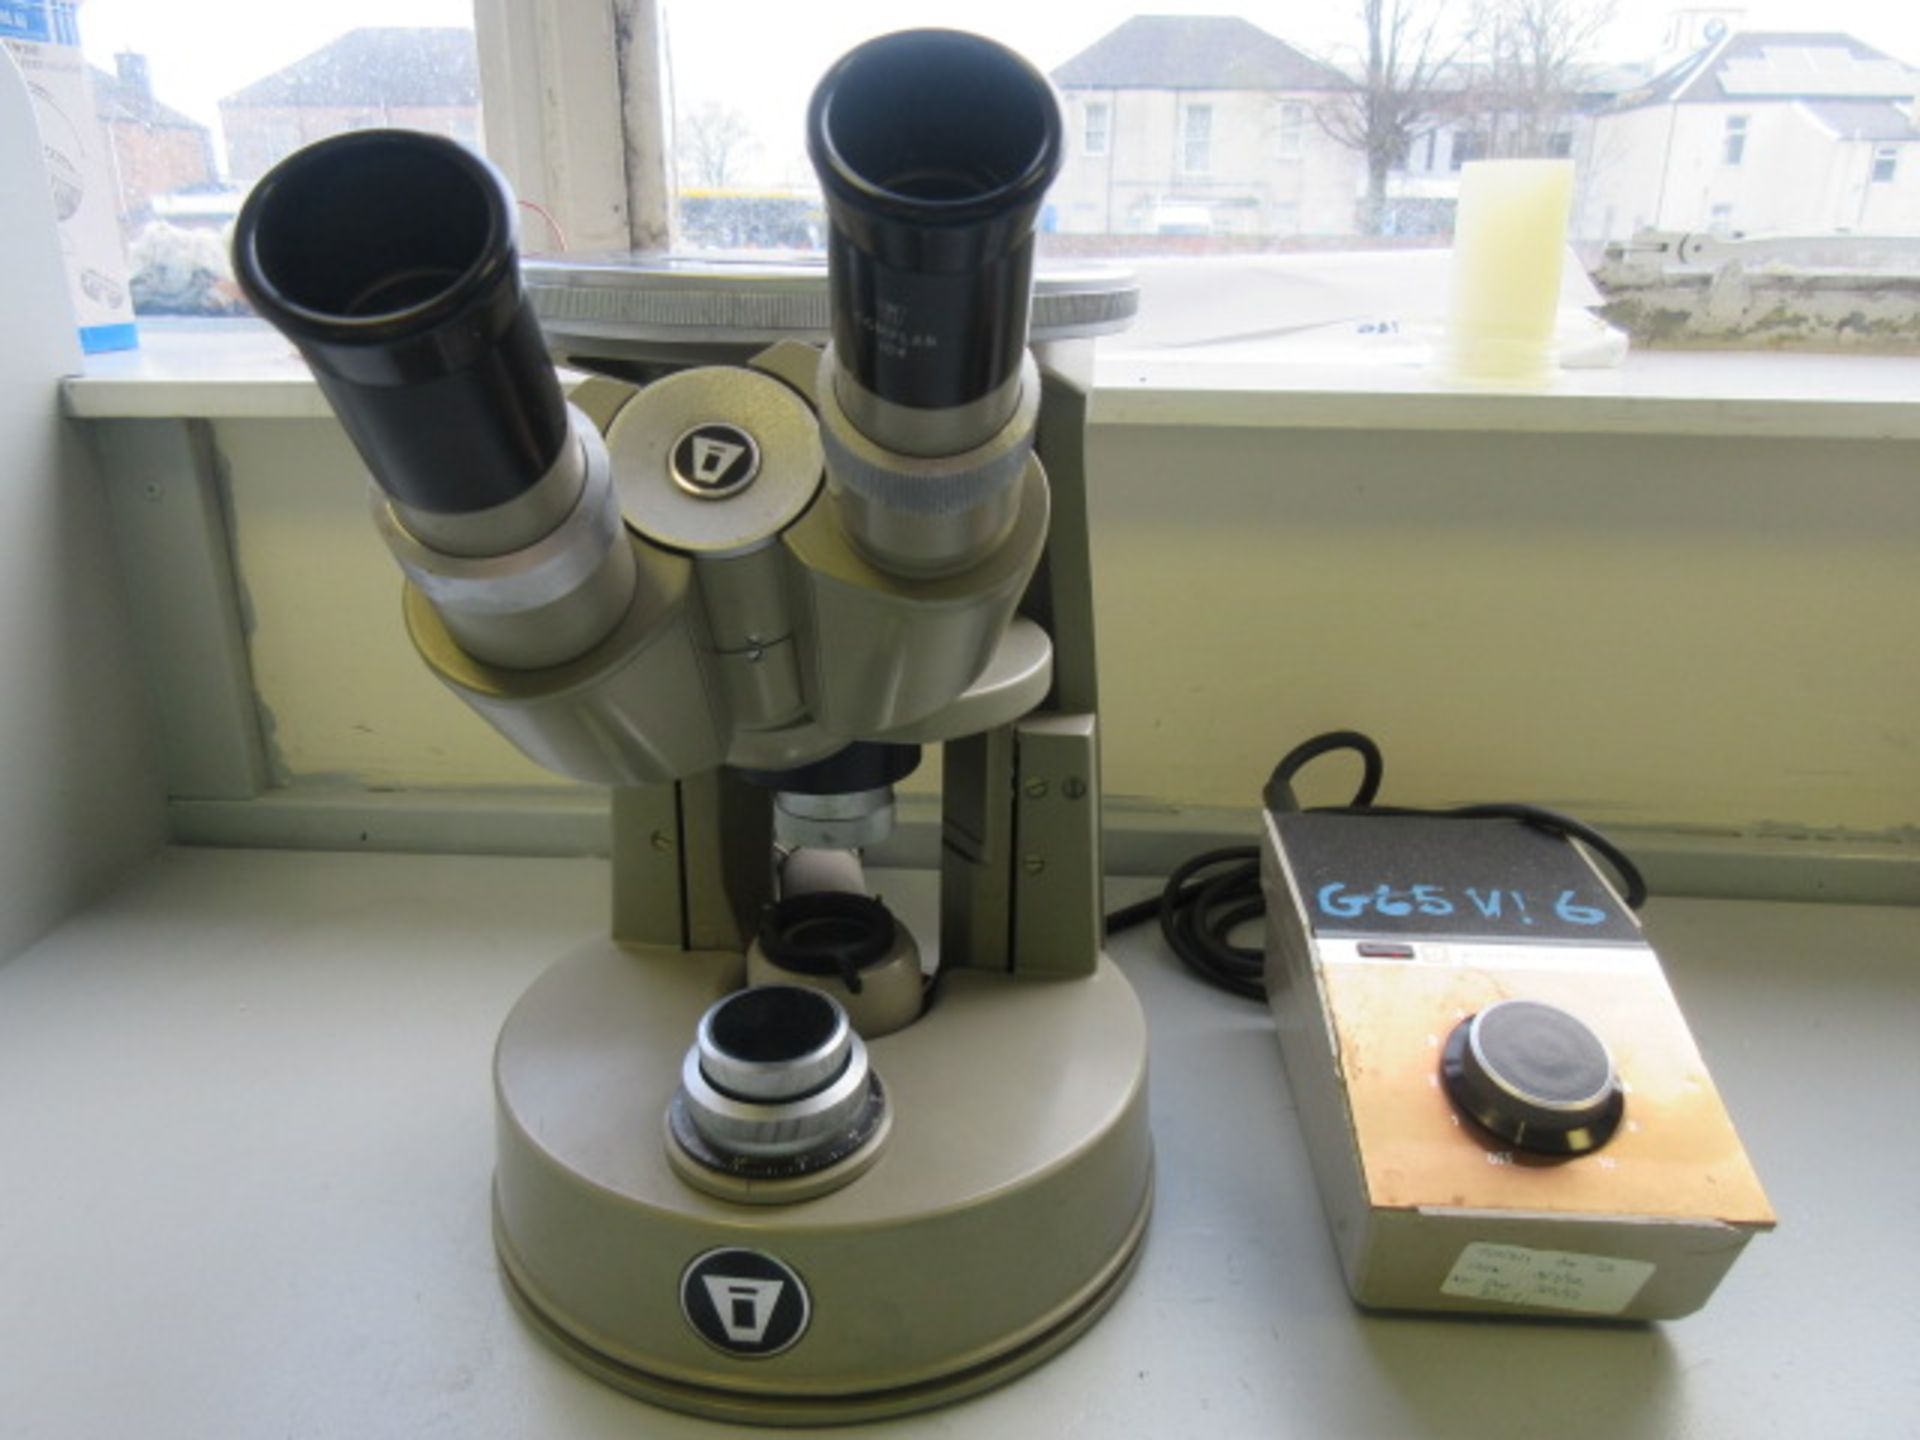 VICKERS BENCH TOP MICROSCOPE WITH LIGHT SOURCE. SN 290490